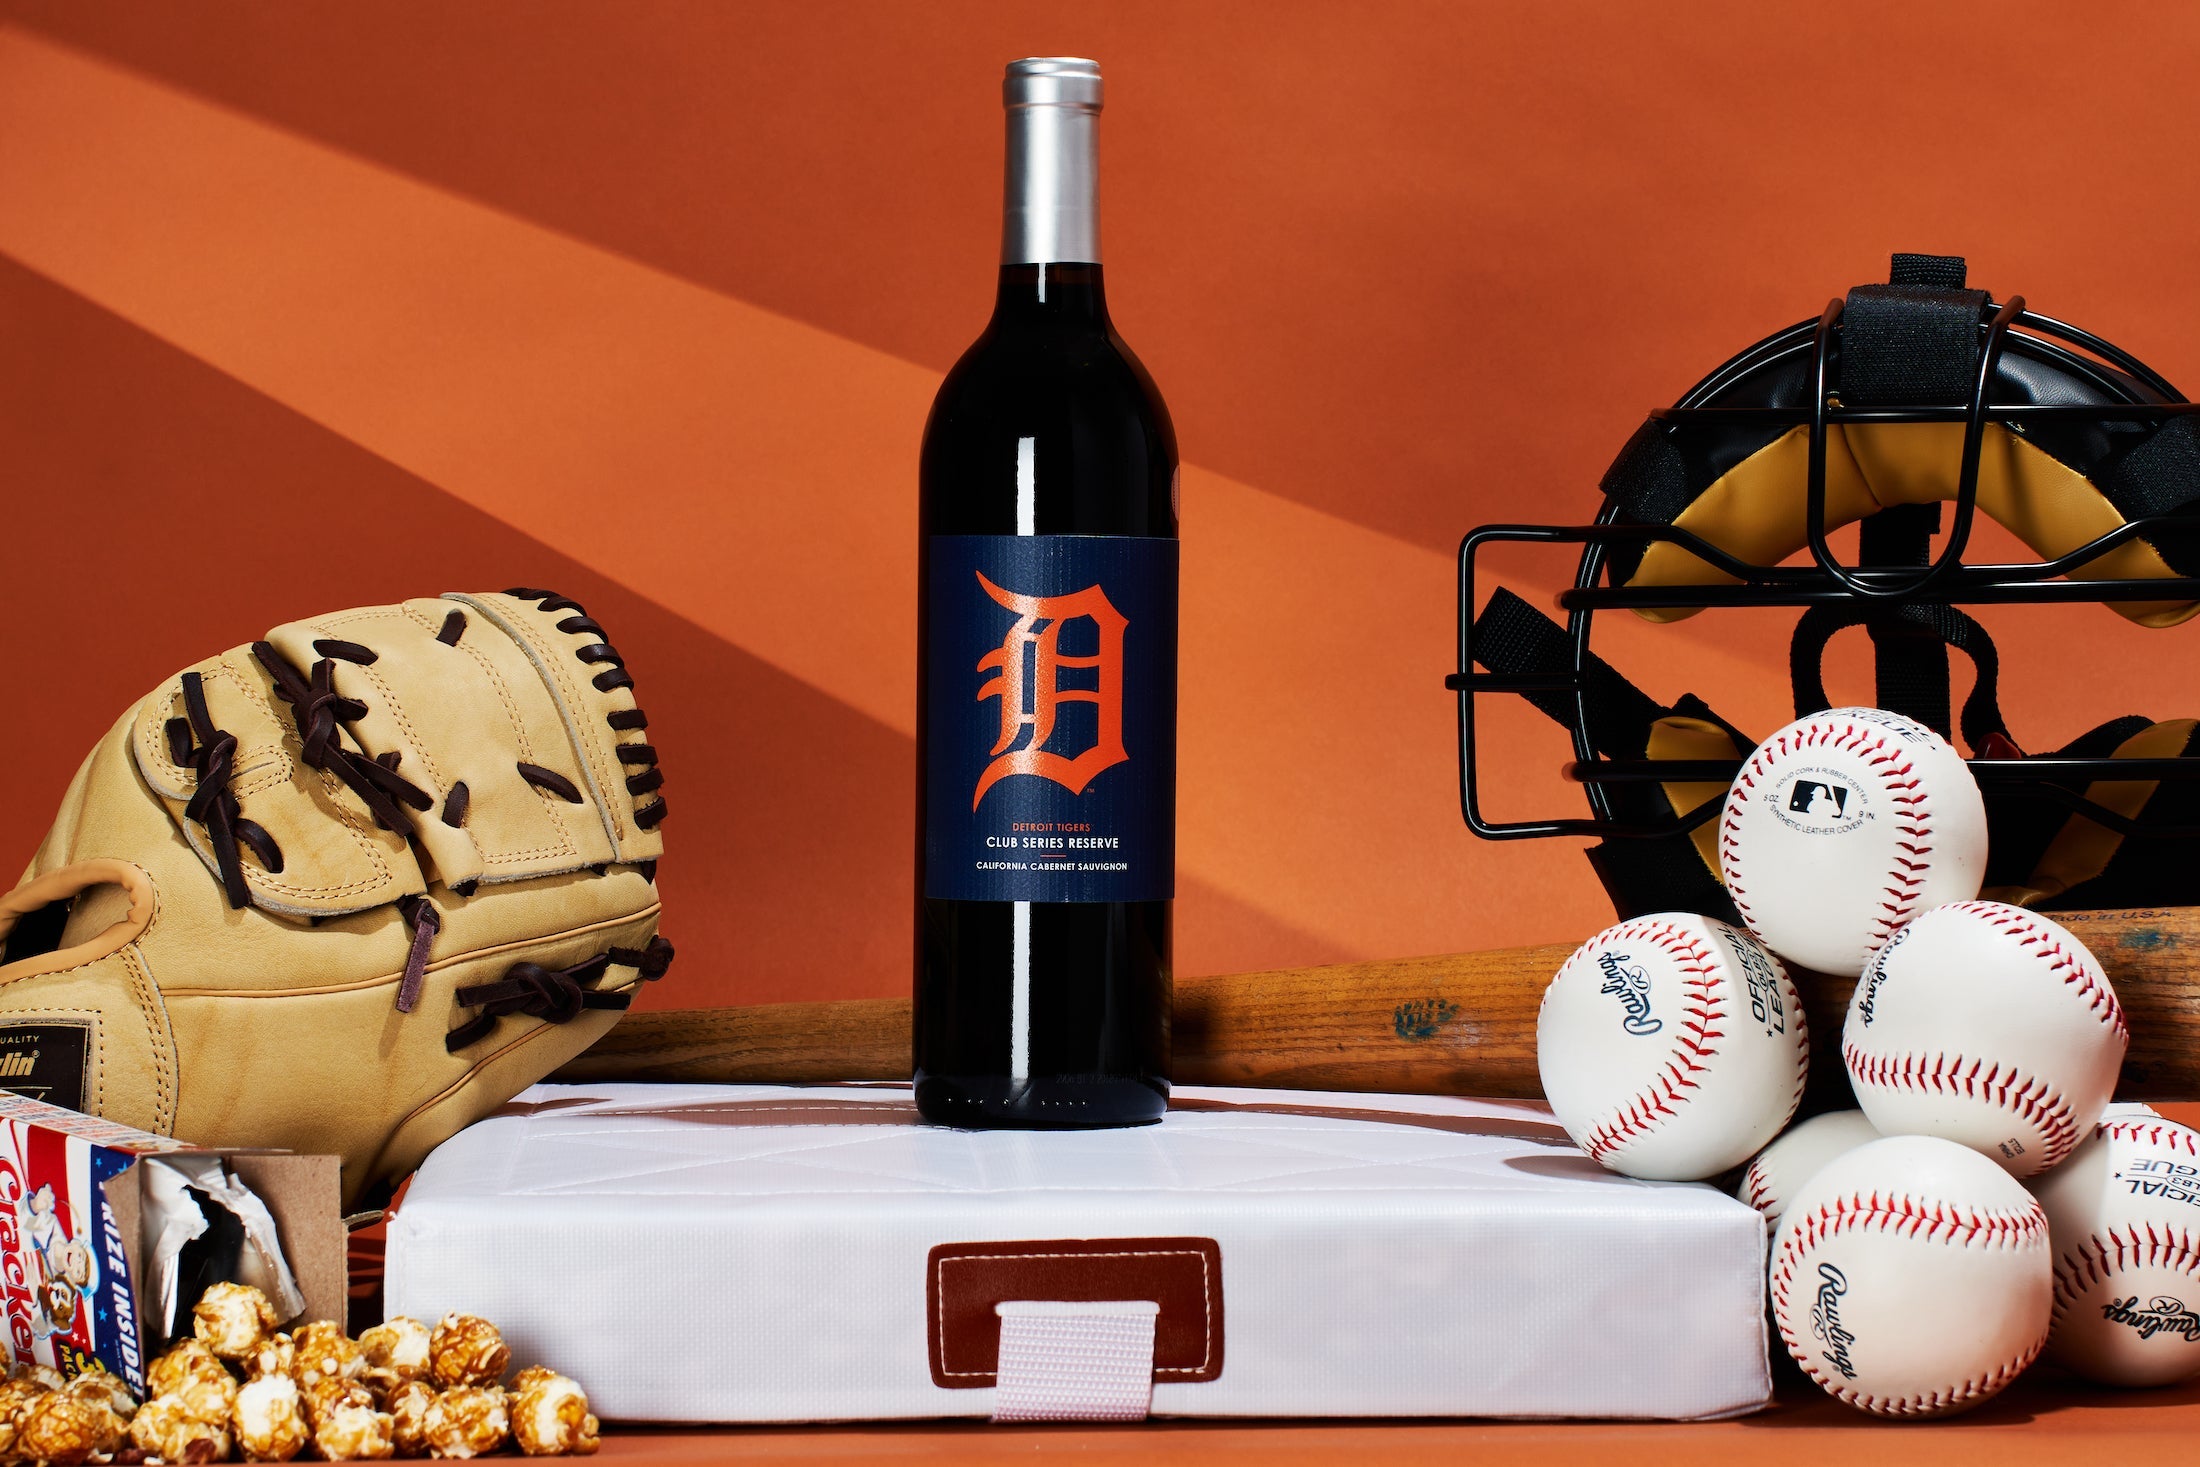 Perfect holiday gifts for the Detroit Tigers fan